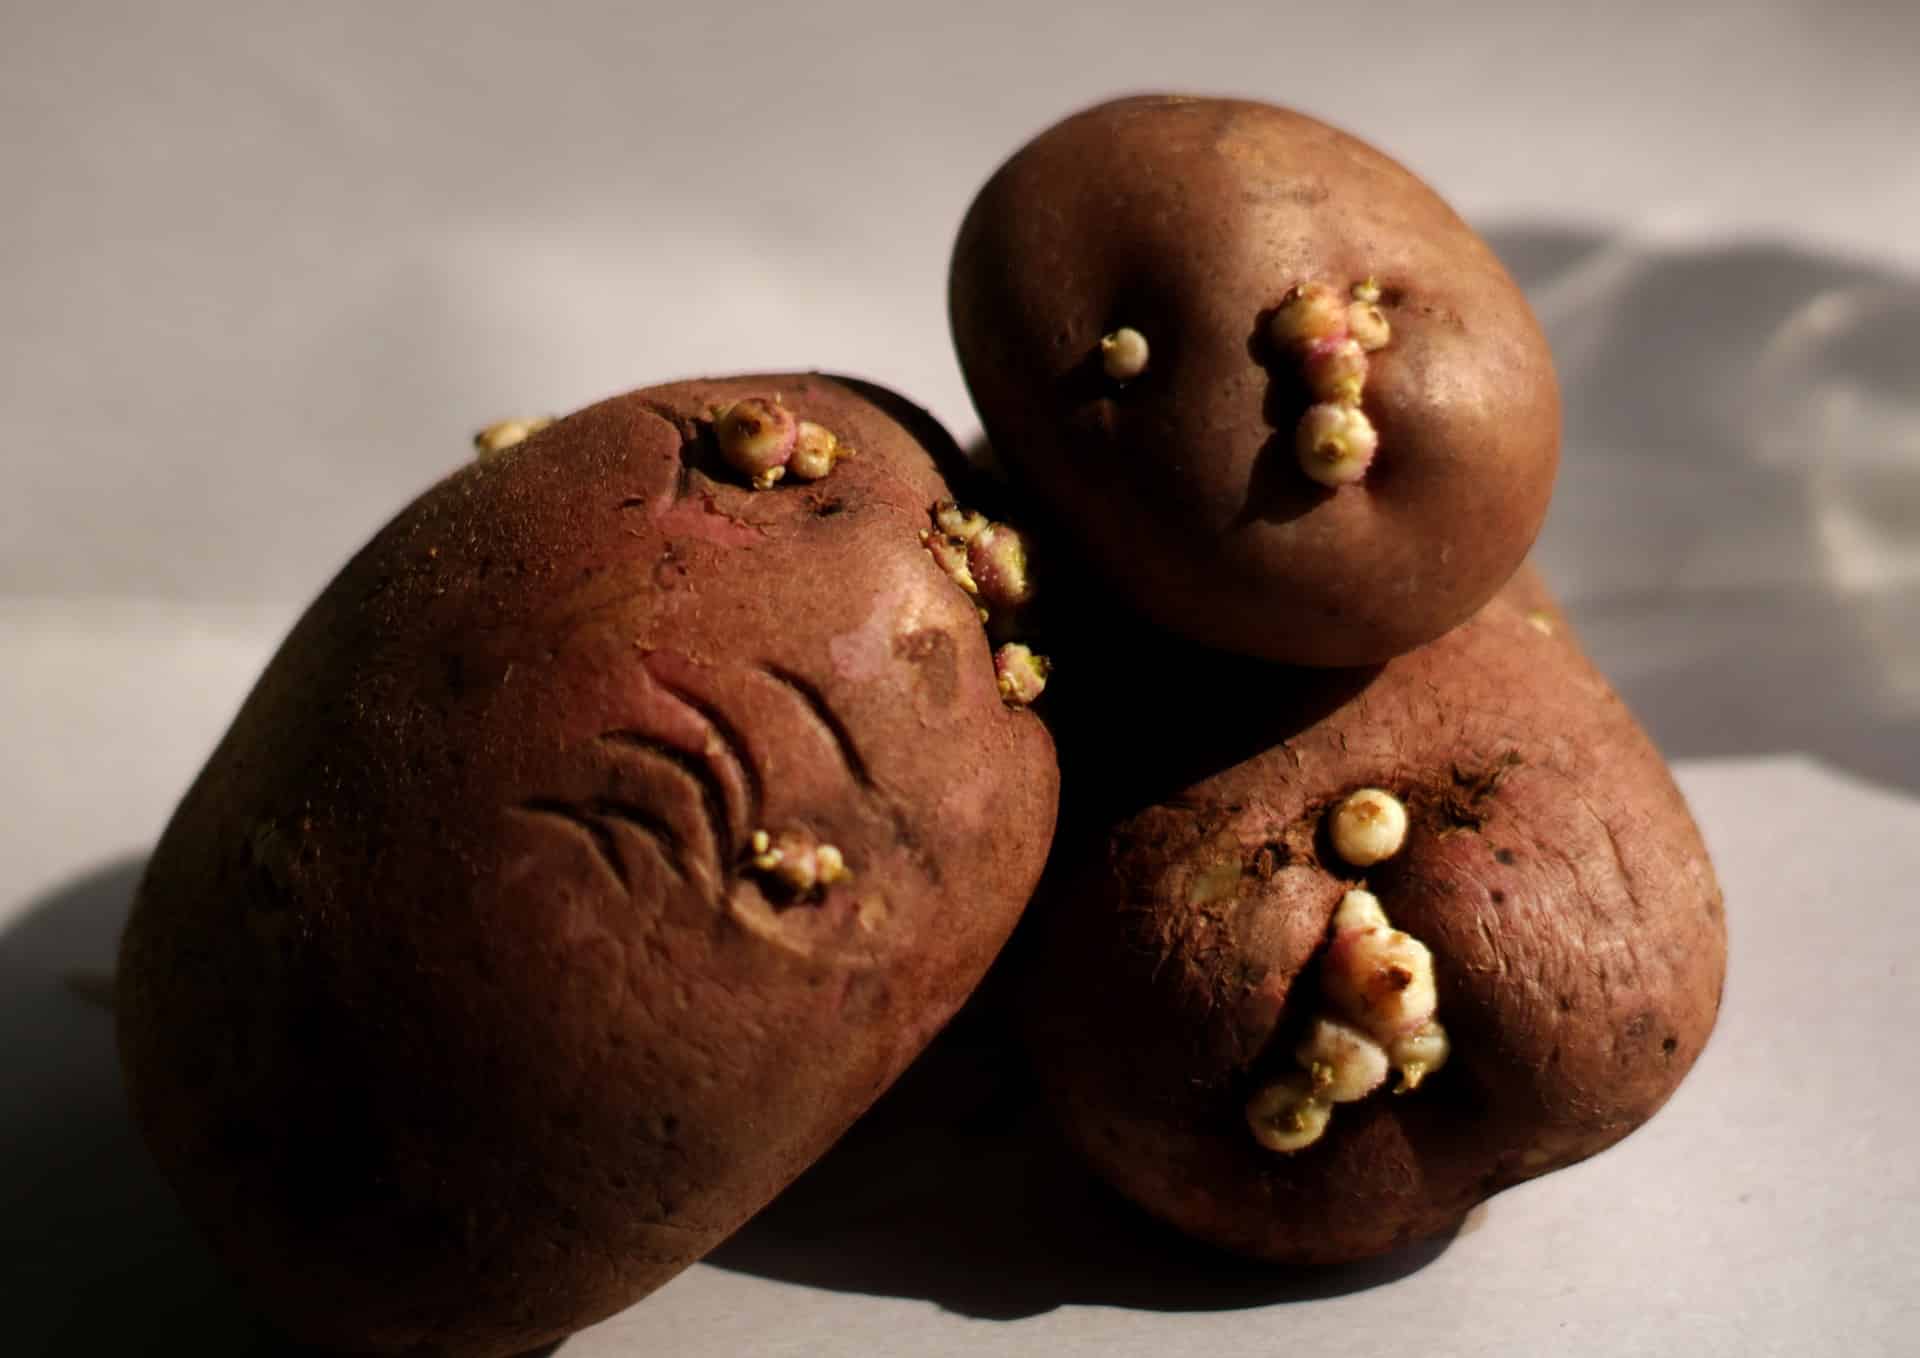 Sprouted potatoes